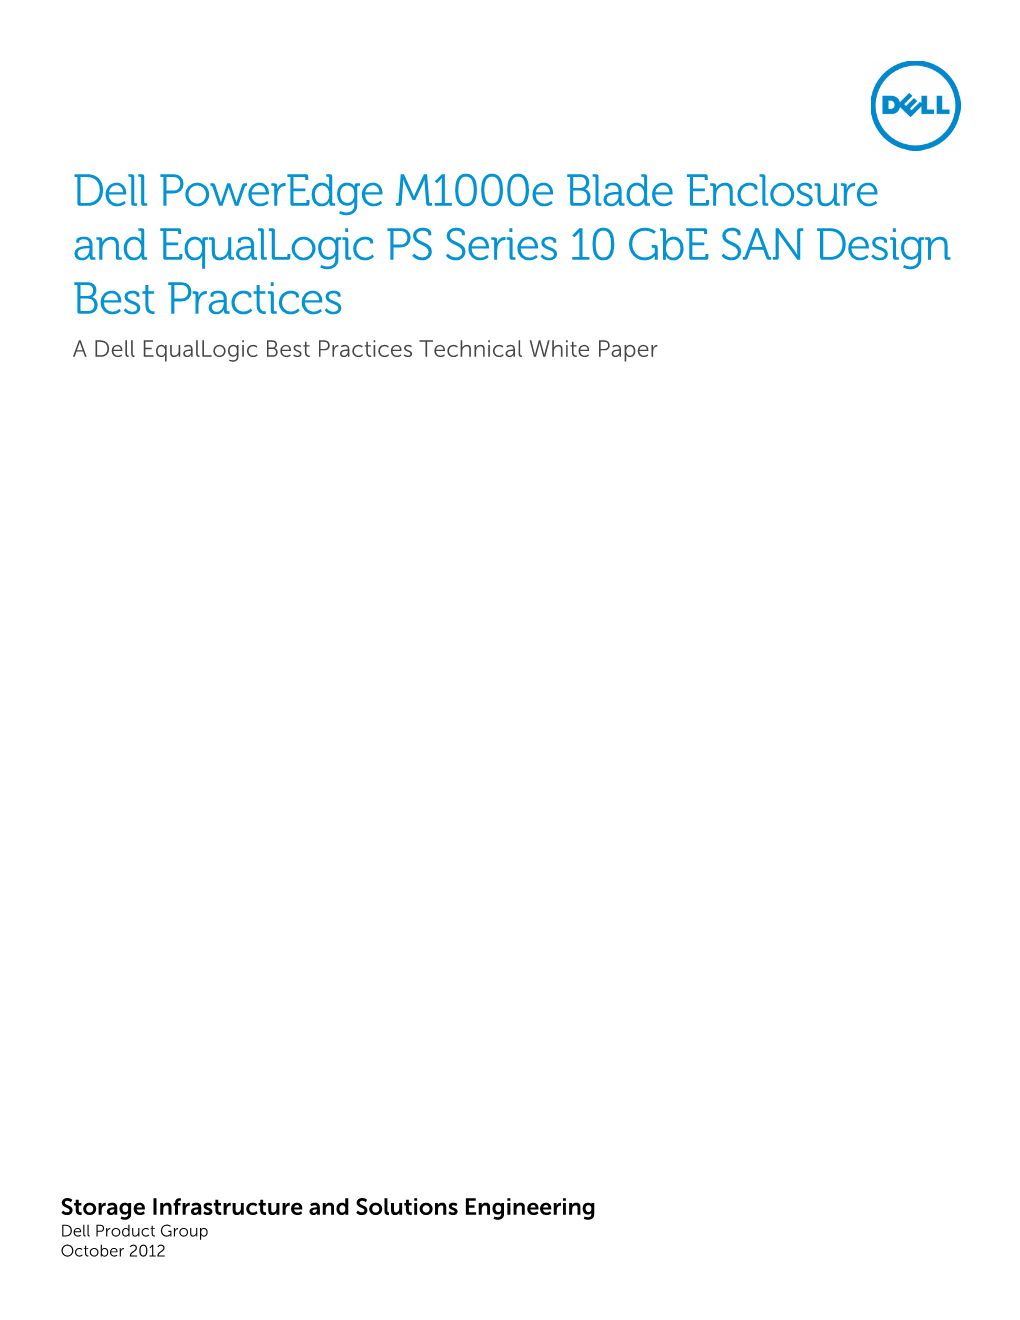 Dell Poweredge M1000e Blade and Equallogic PS Series 10 Gbe SAN